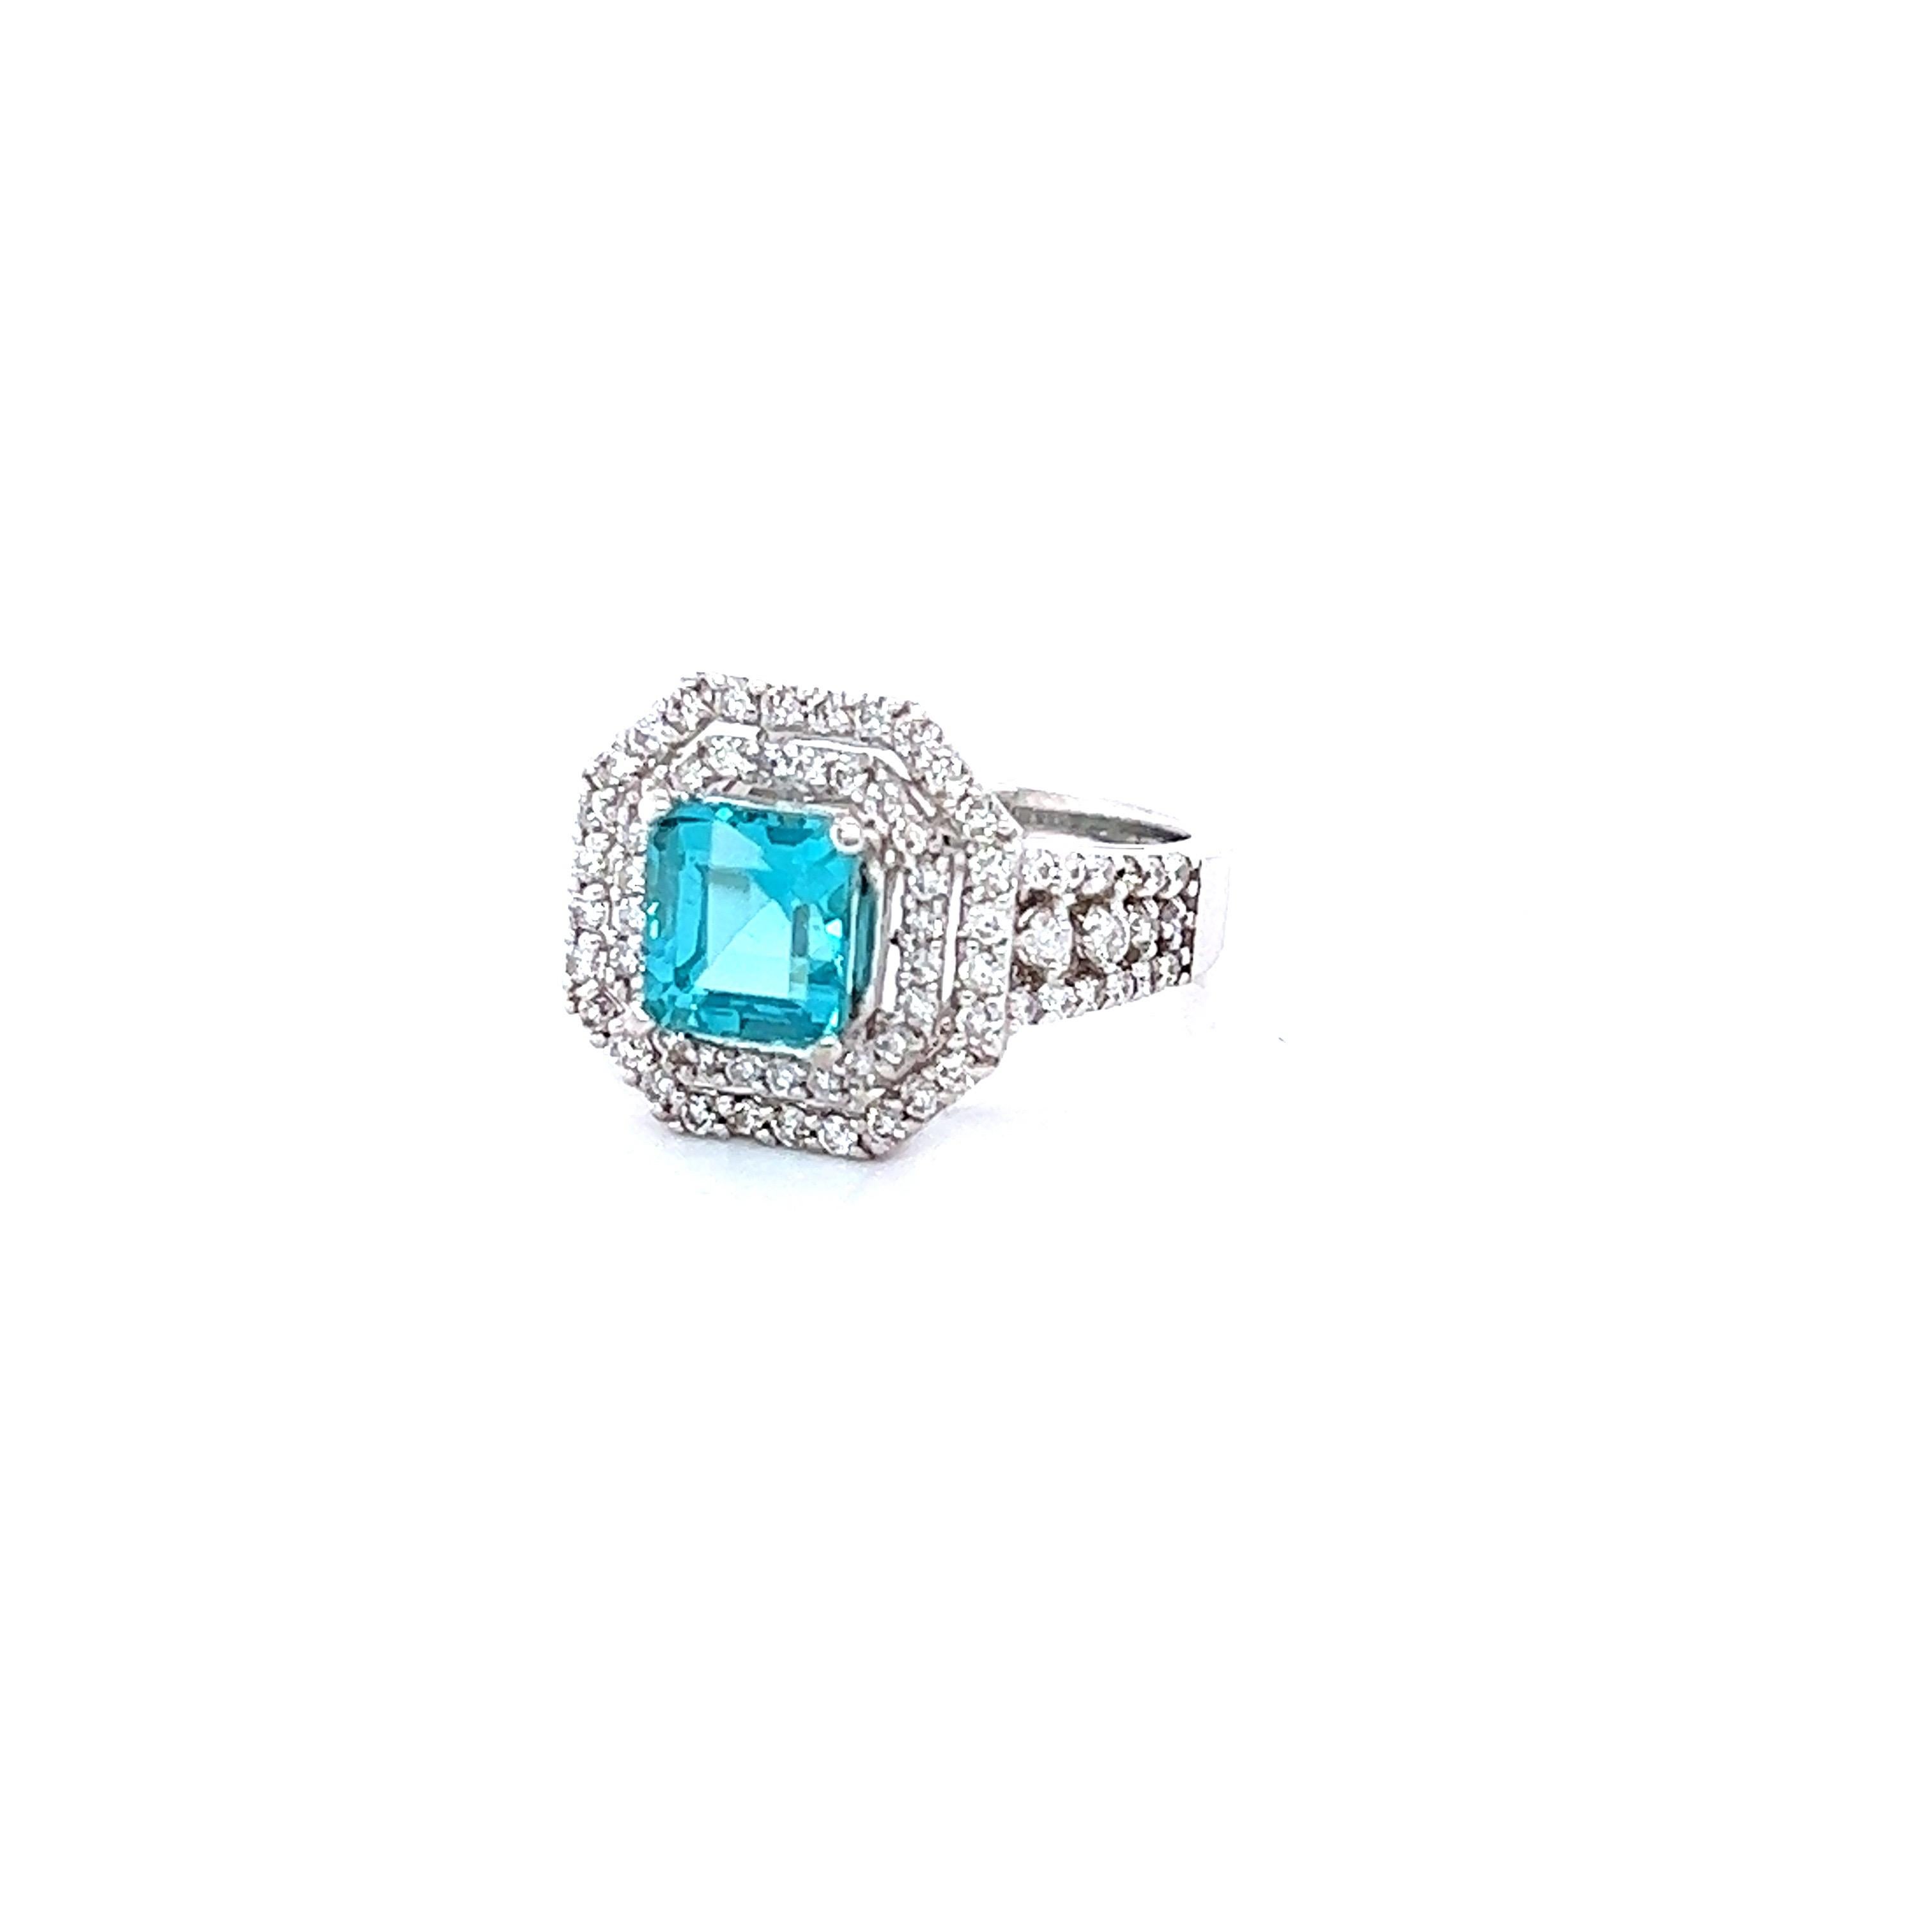 This ring has a 2.22 carat Natural Square Cut Apatite in the center of the ring and is surrounded by 84 Natural Round Cut Diamonds that weigh 0.89 carats. The clarity and color of the diamonds are SI1-F. The total carat weight of the ring is 3.11